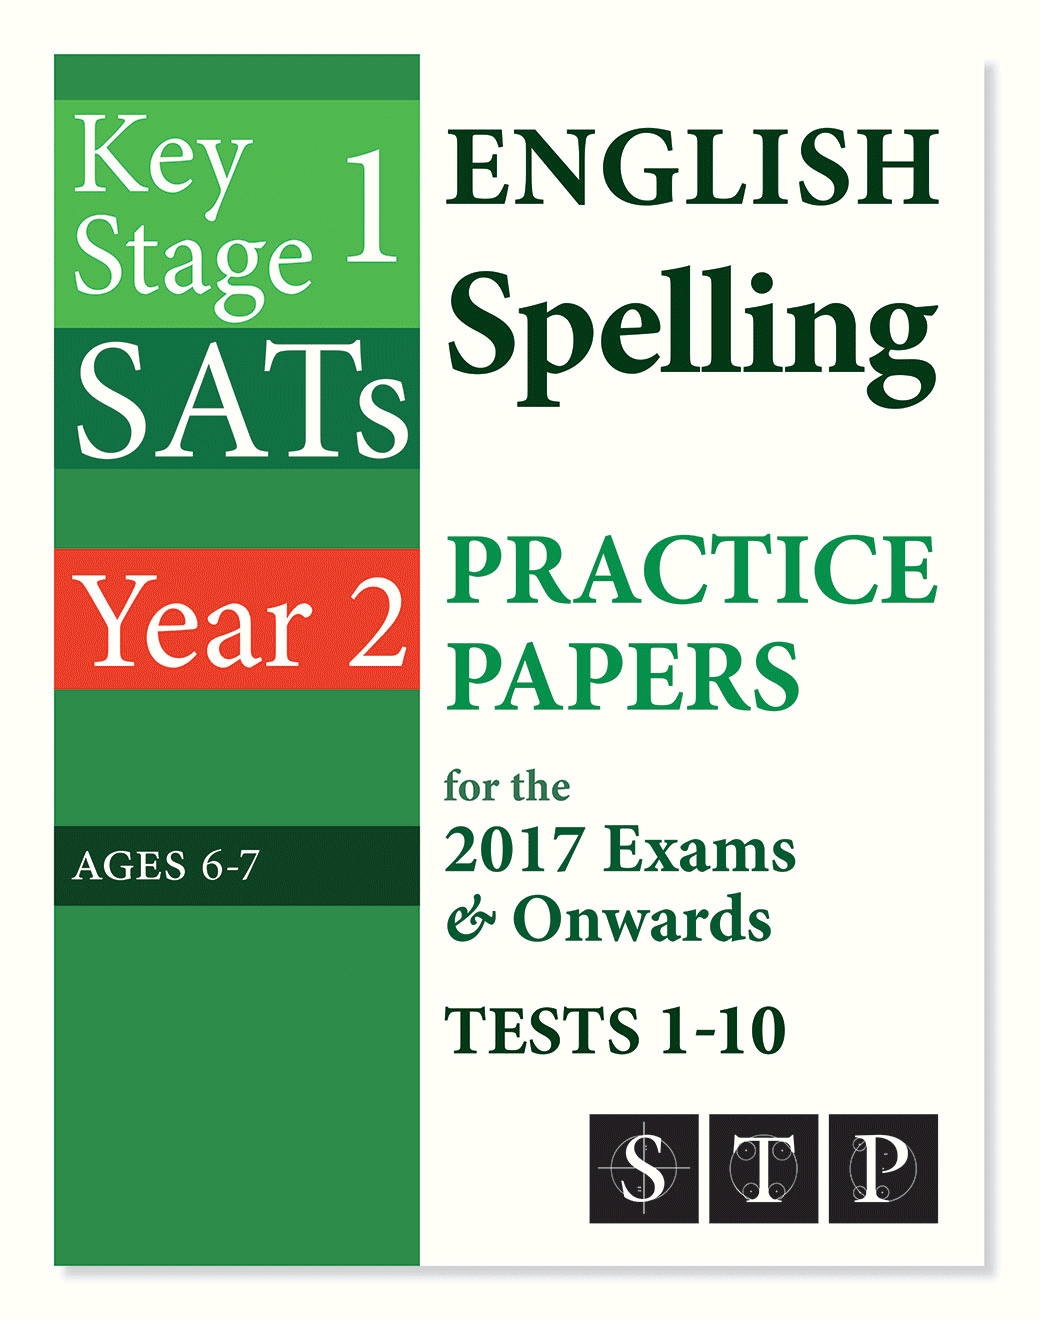 KS1 SATs English Spelling Practice Papers for the 2017 Exams & Onwards Tests 1-10. Click here to see inside!